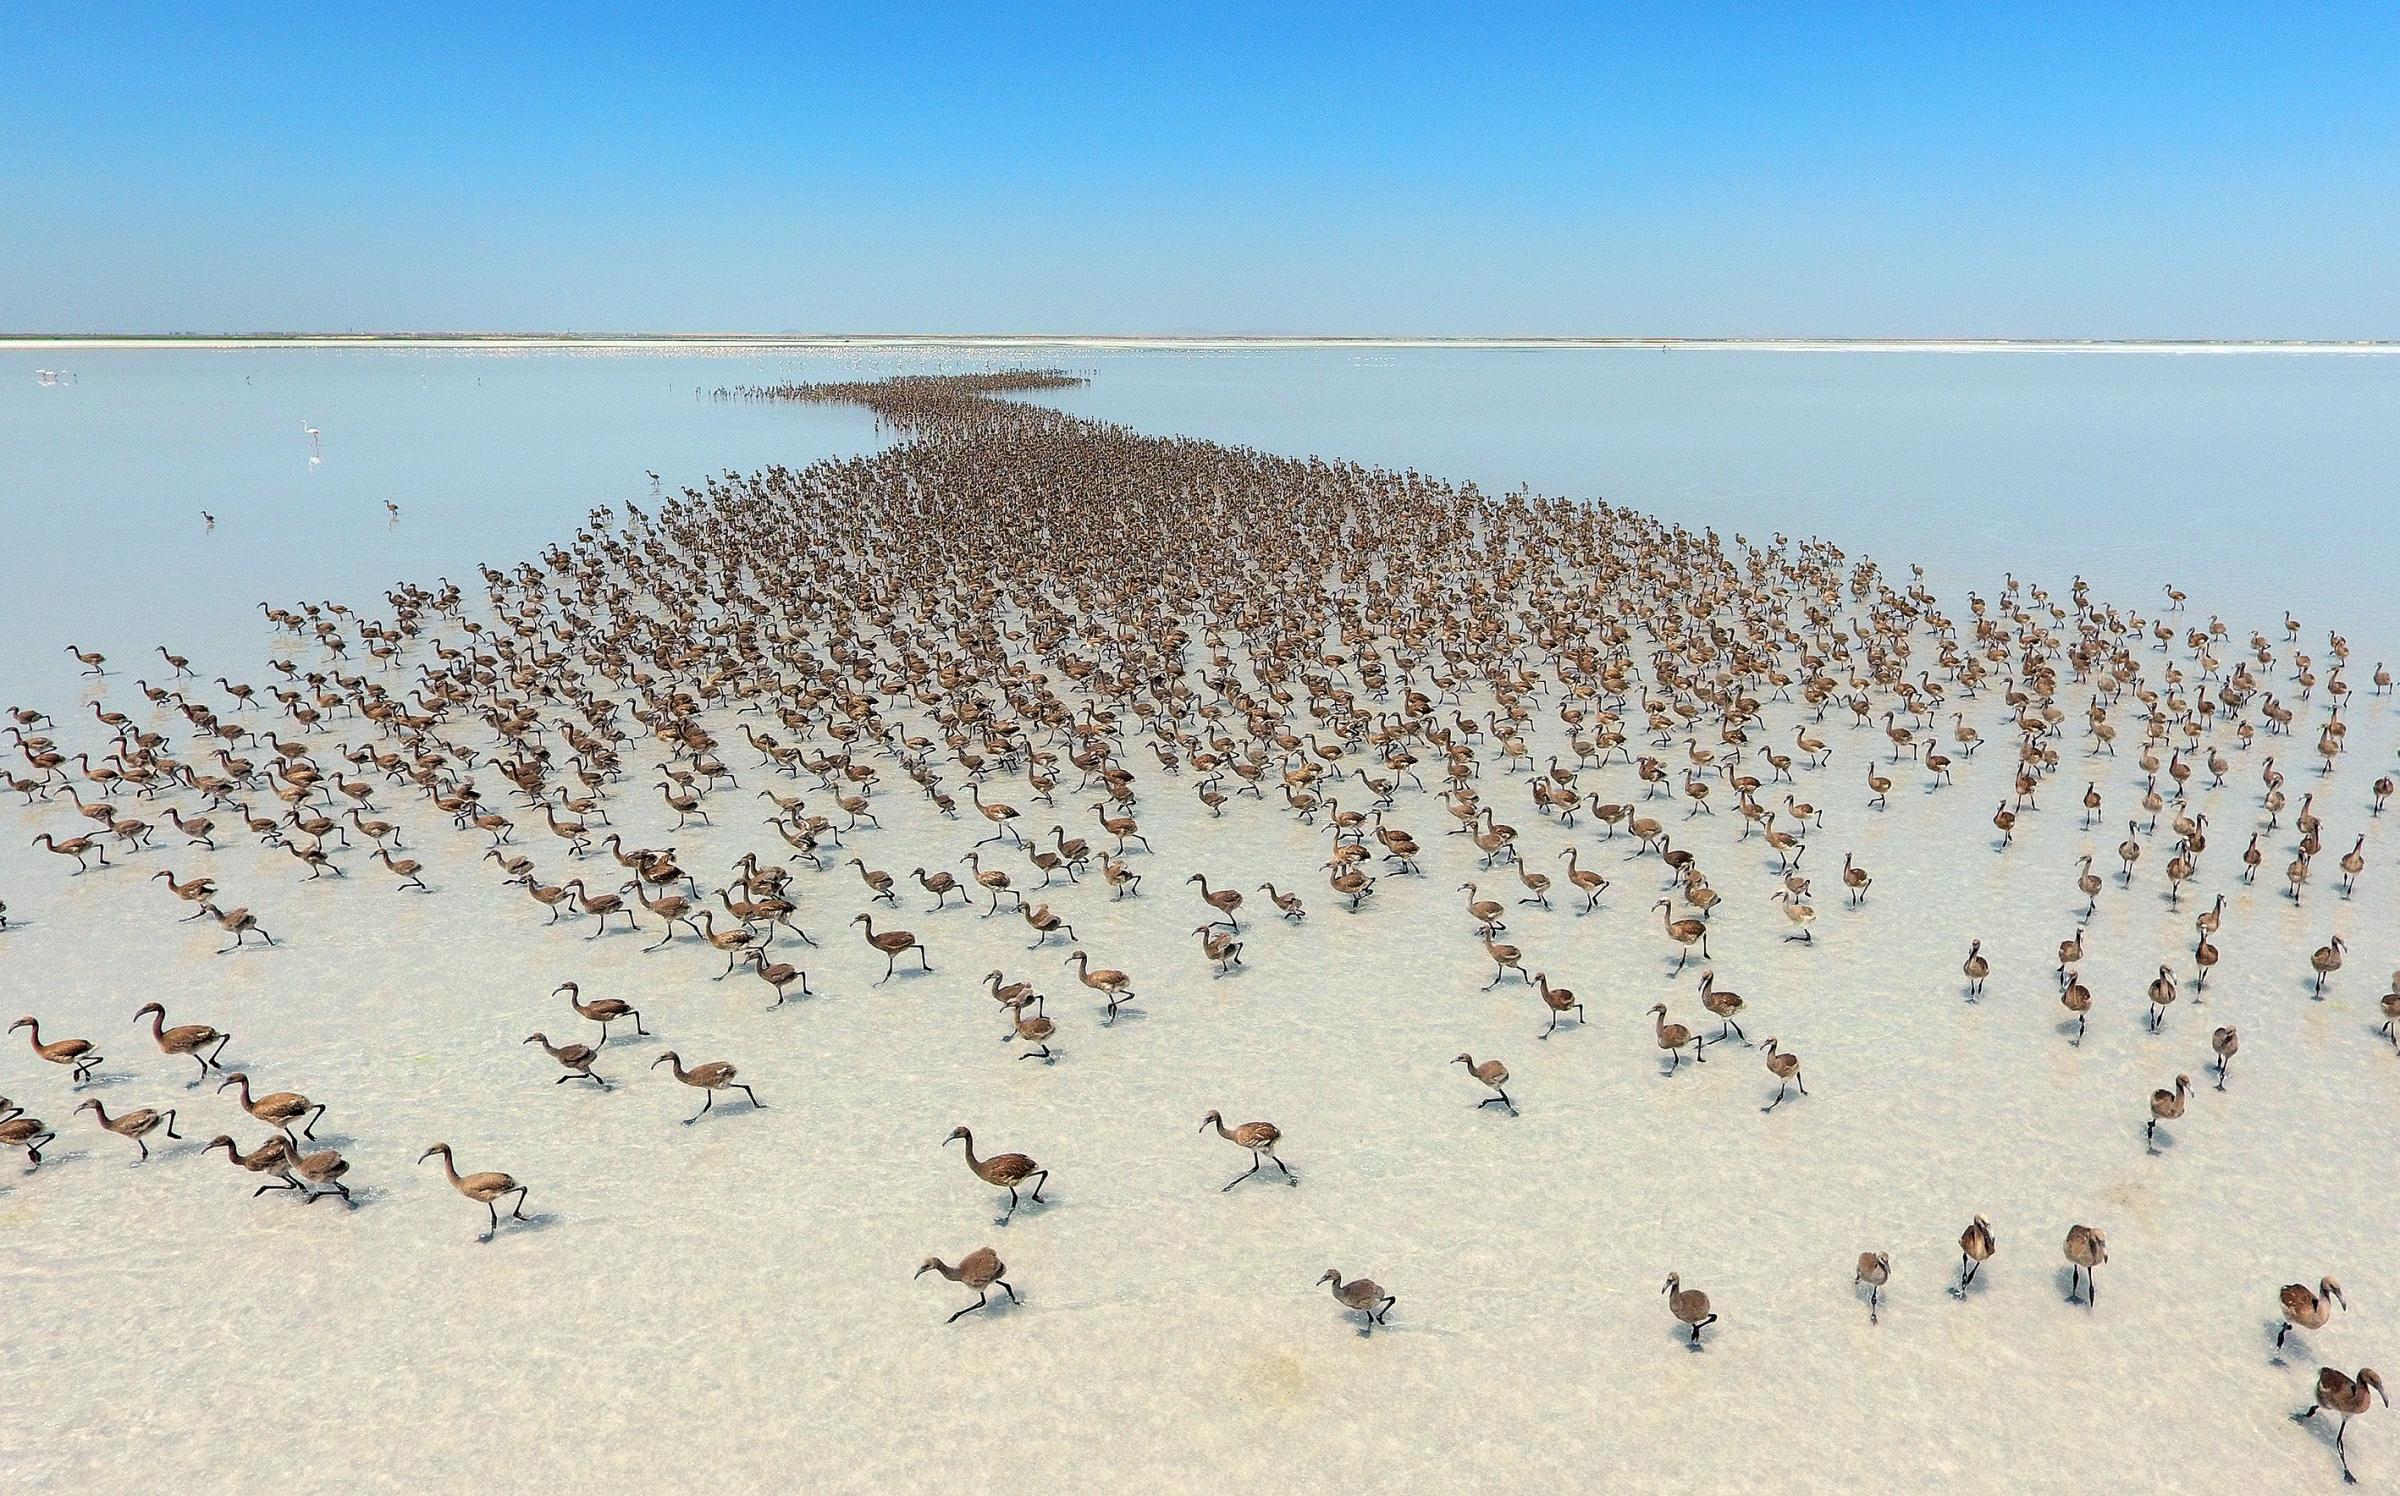 Flamingos after thousands of flamingo chicks have emerged from their nests at Salt Lake, which is home to the biggest flamingo colony in Turkey and the Mediterranean basin, in Aksaray, Turkey, on June 28, 2016.